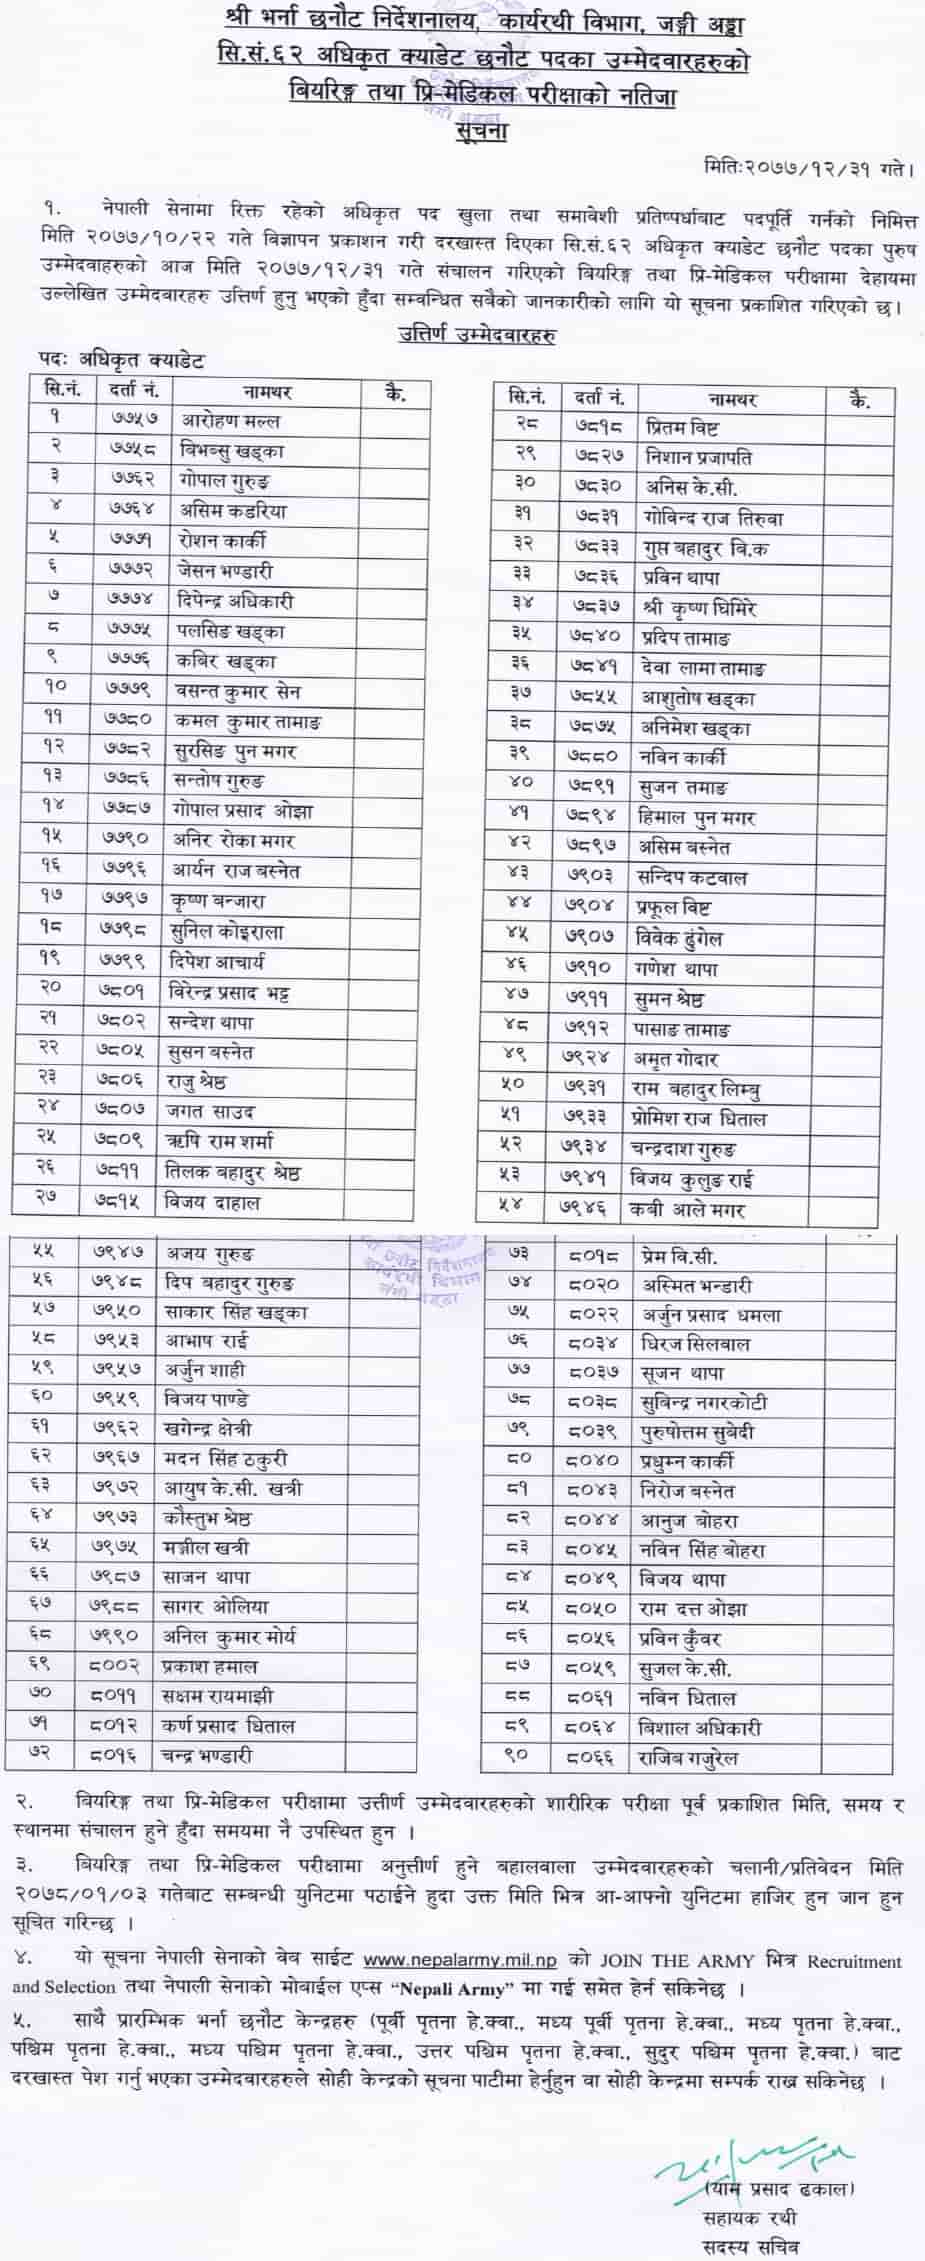 Nepal Army Officer Cadet Bearing and Pre-medical Test Result